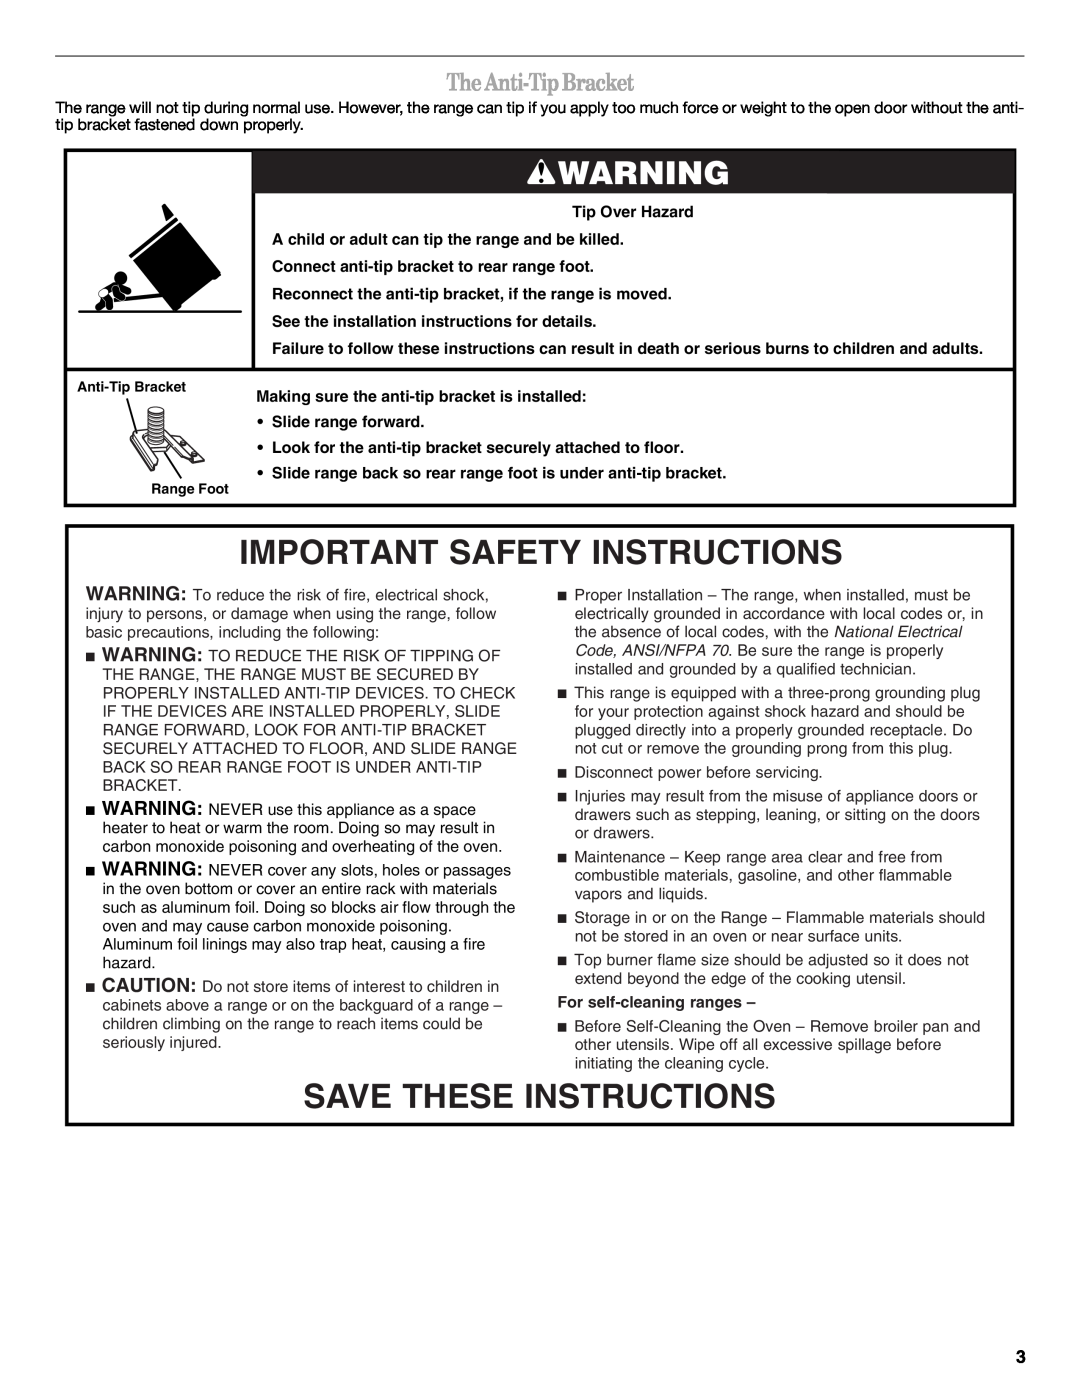 Amana W10196156B The Anti-Tip Bracket, Important Safety Instructions, Save These Instructions, For self-cleaning ranges 